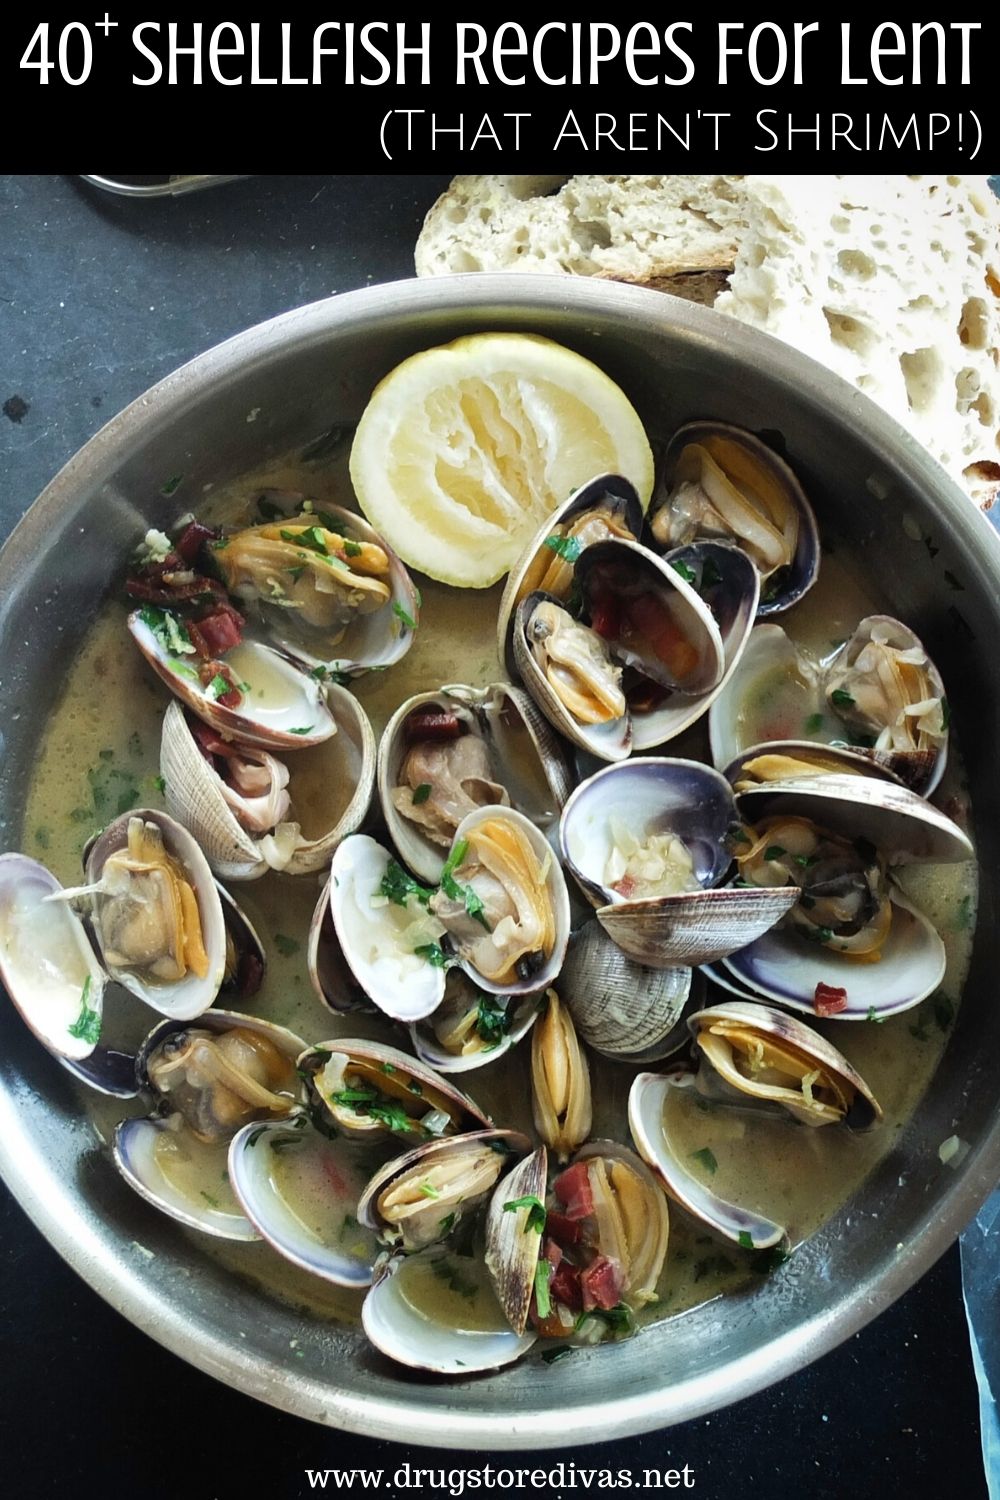 Mussels and lemon in a bowl with the words "40+ Shellfish Recipes For Lent (That Aren't Shrimp!)" digitally written above it.